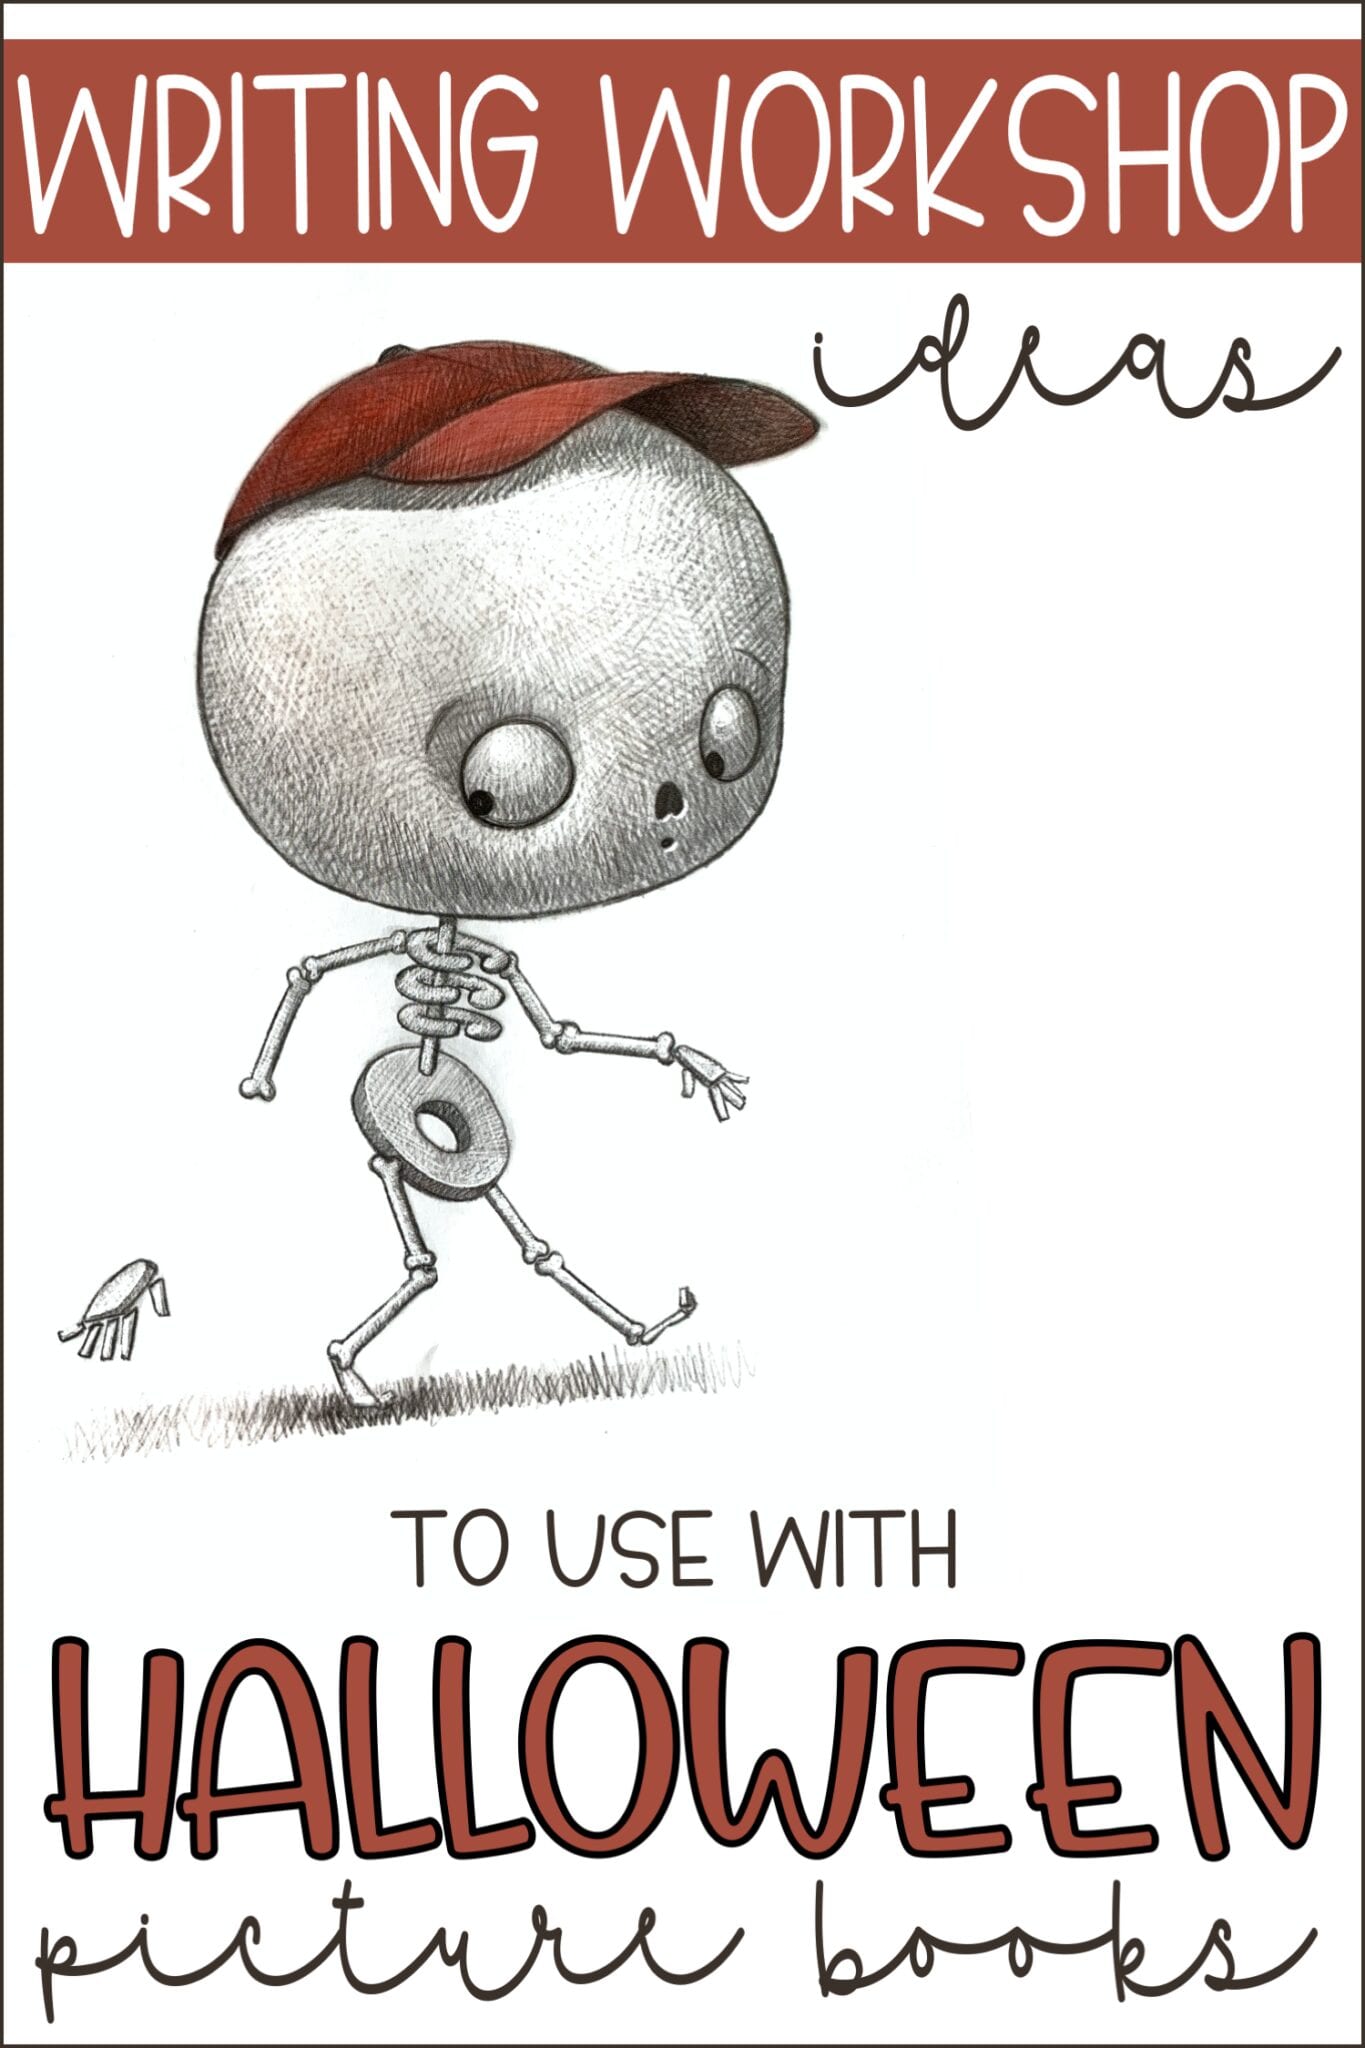 Unique Halloween Picture Books with Writing Workshop Ideas